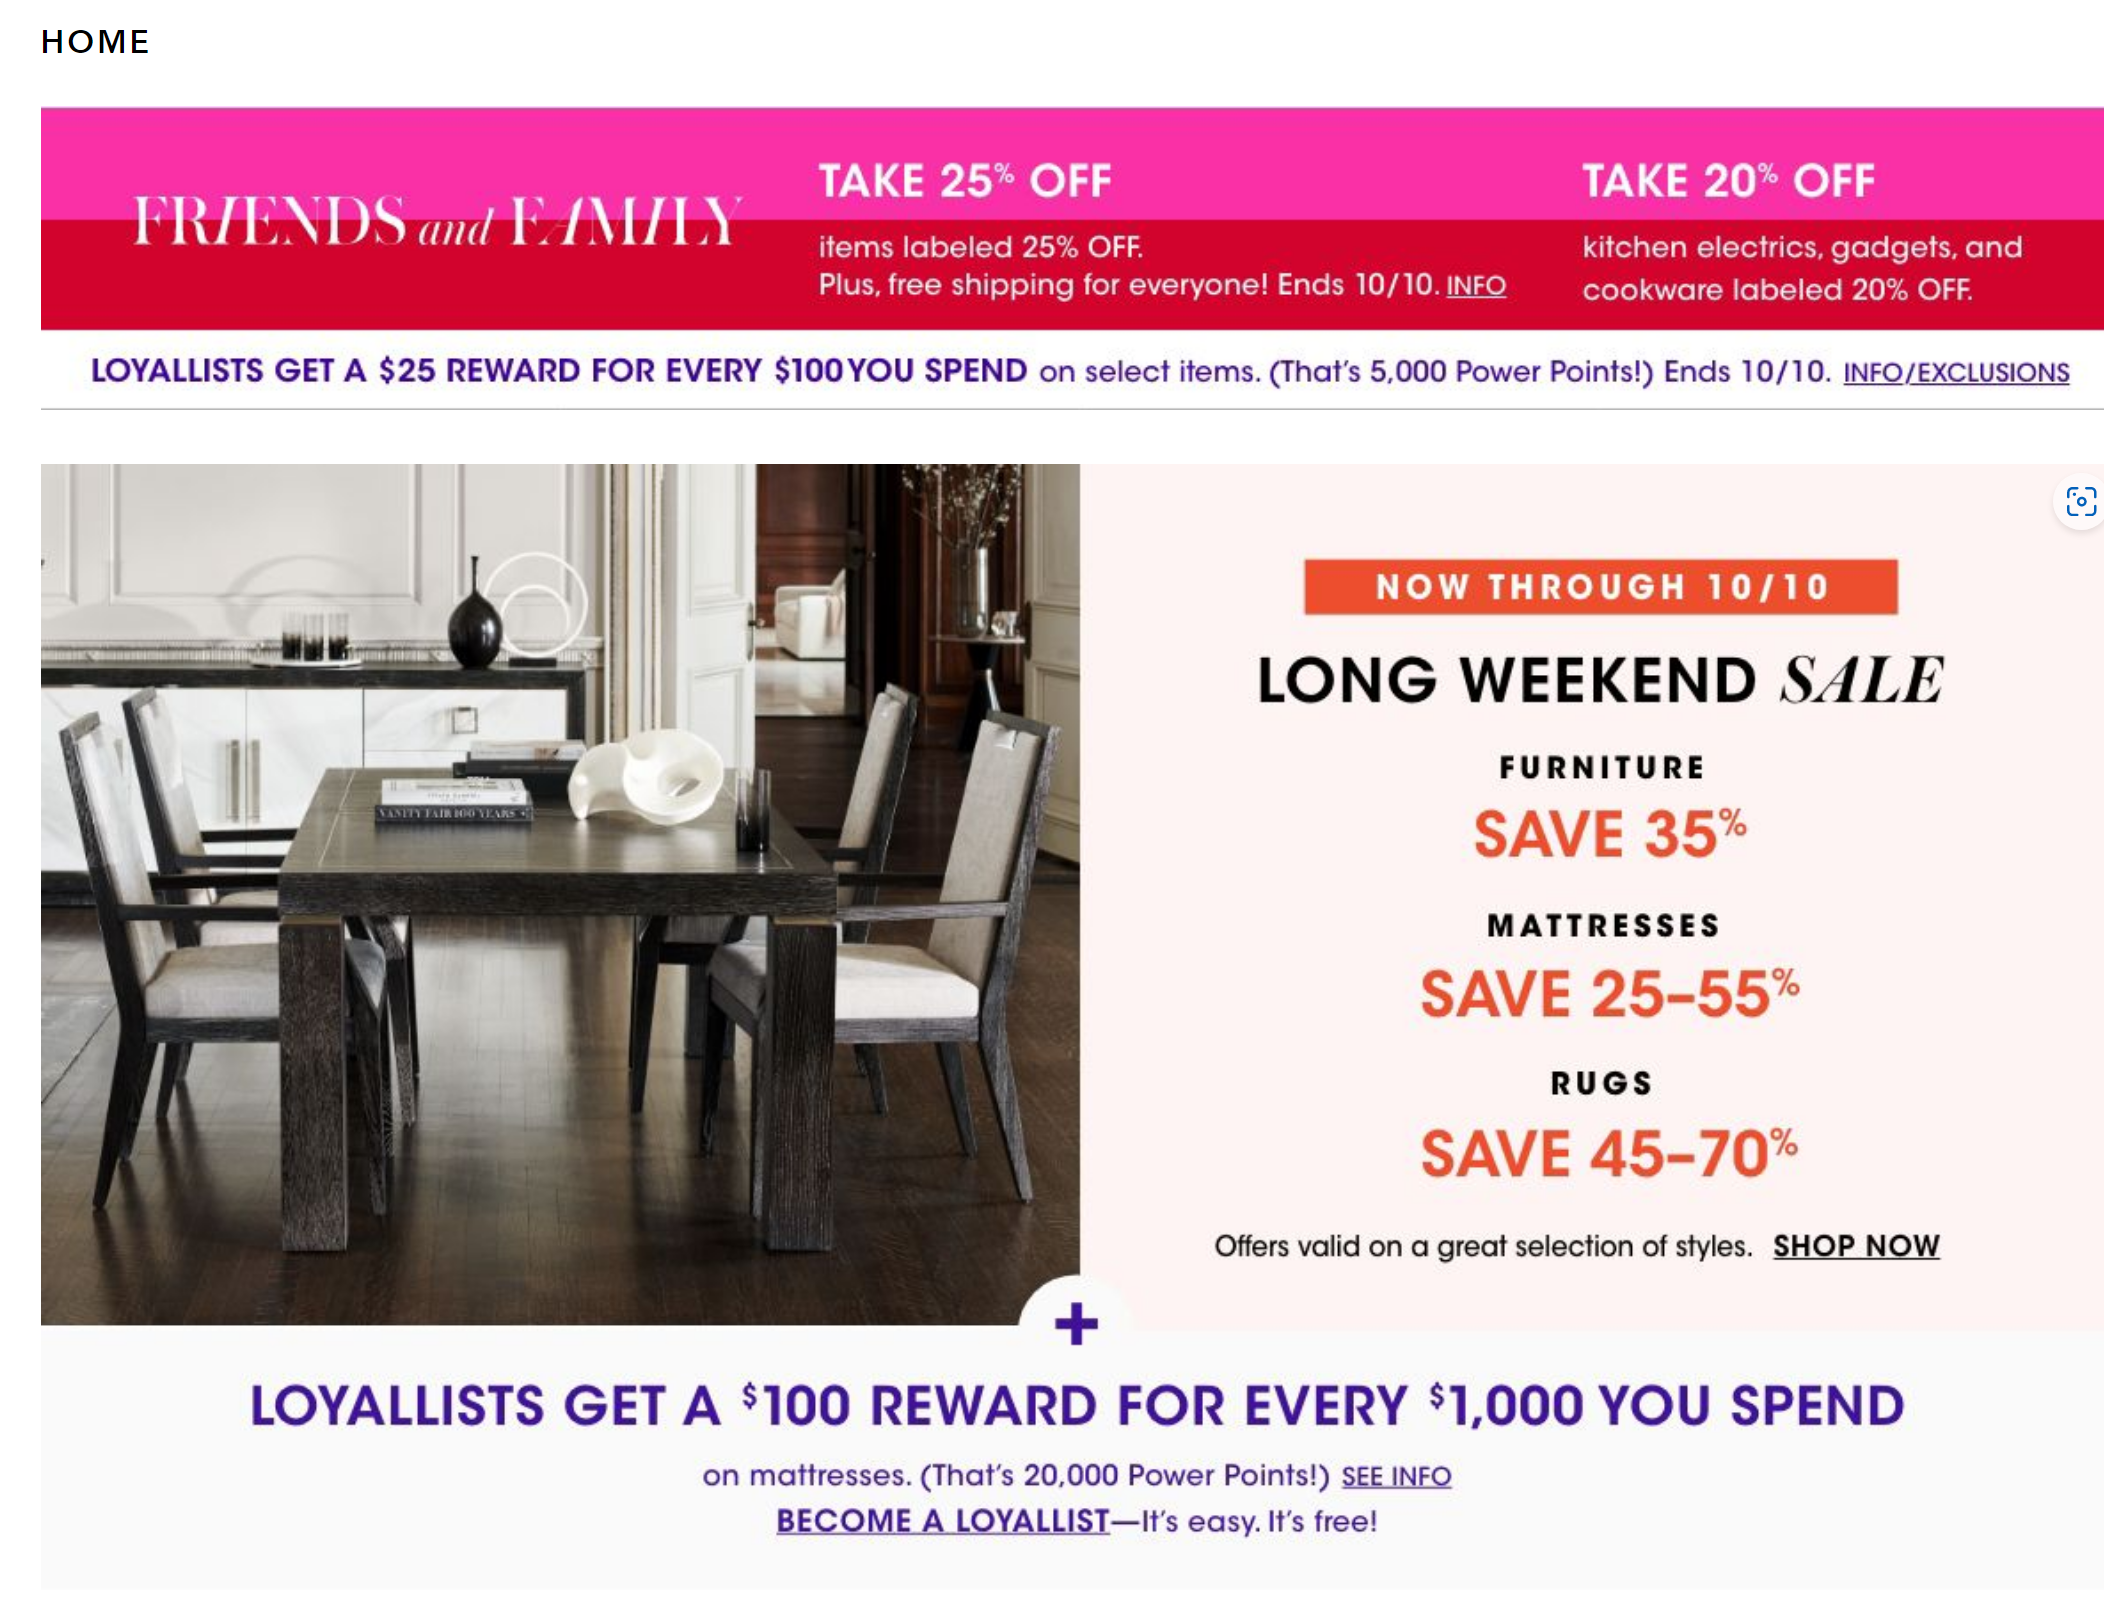 Home Store - Bloomingdale's 精选厨具小家电等额外8折 Take 20% off Cookware, Kitchen Electrics and Gadgets labeled ""FRIENDS & FAMILY: 20% OFF DISCOUNT APPLIED IN BAG"" 另有家具床垫地毯等低至3折